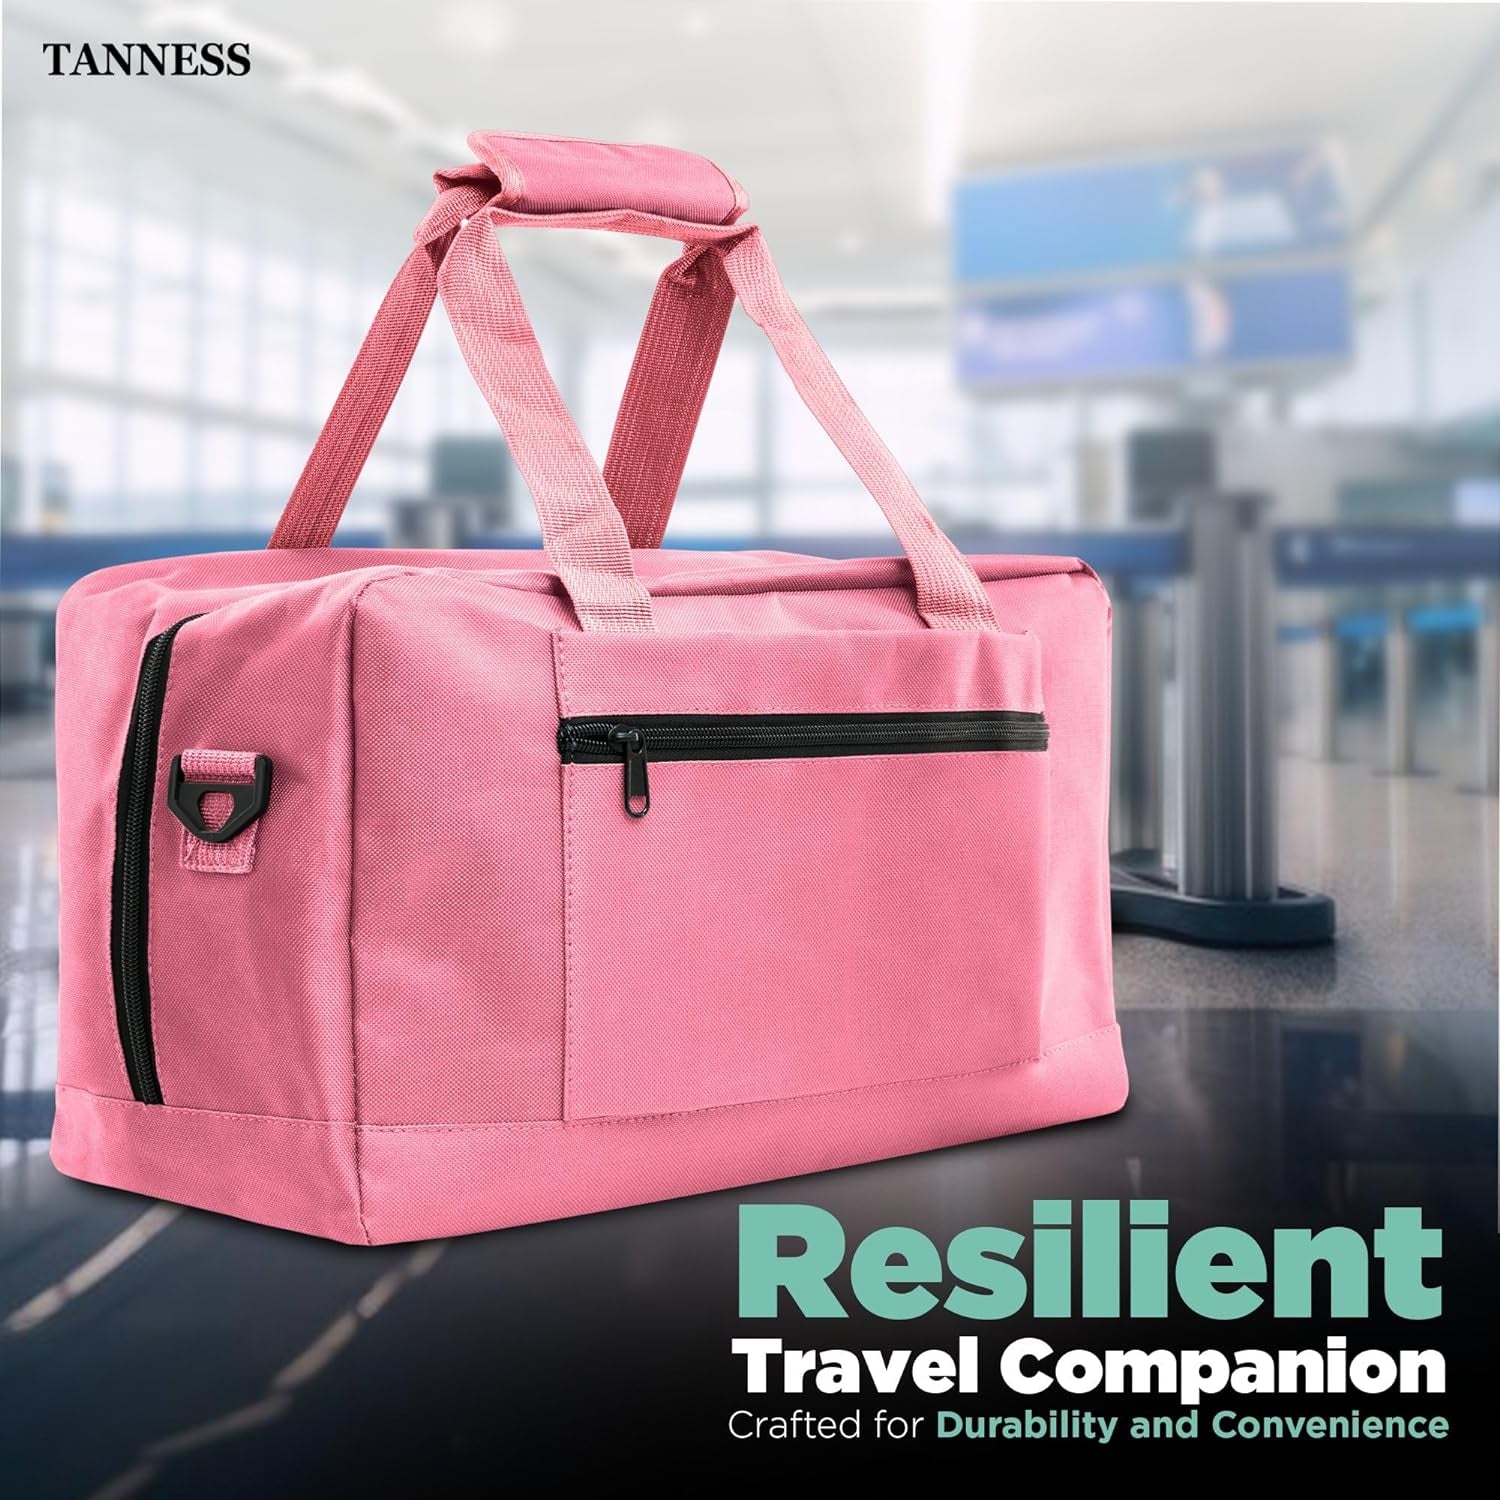 40X20X25 Cabin Bag, Ryanair Cabin Bags 40X20X25|Ryanair Cabin Bags, Cabin Bag, Ryanair Cabin Bags 40X20X25 Underseat|Weekend Bag, Carry on Bag, Travel Bag for All Occasions Men & Women